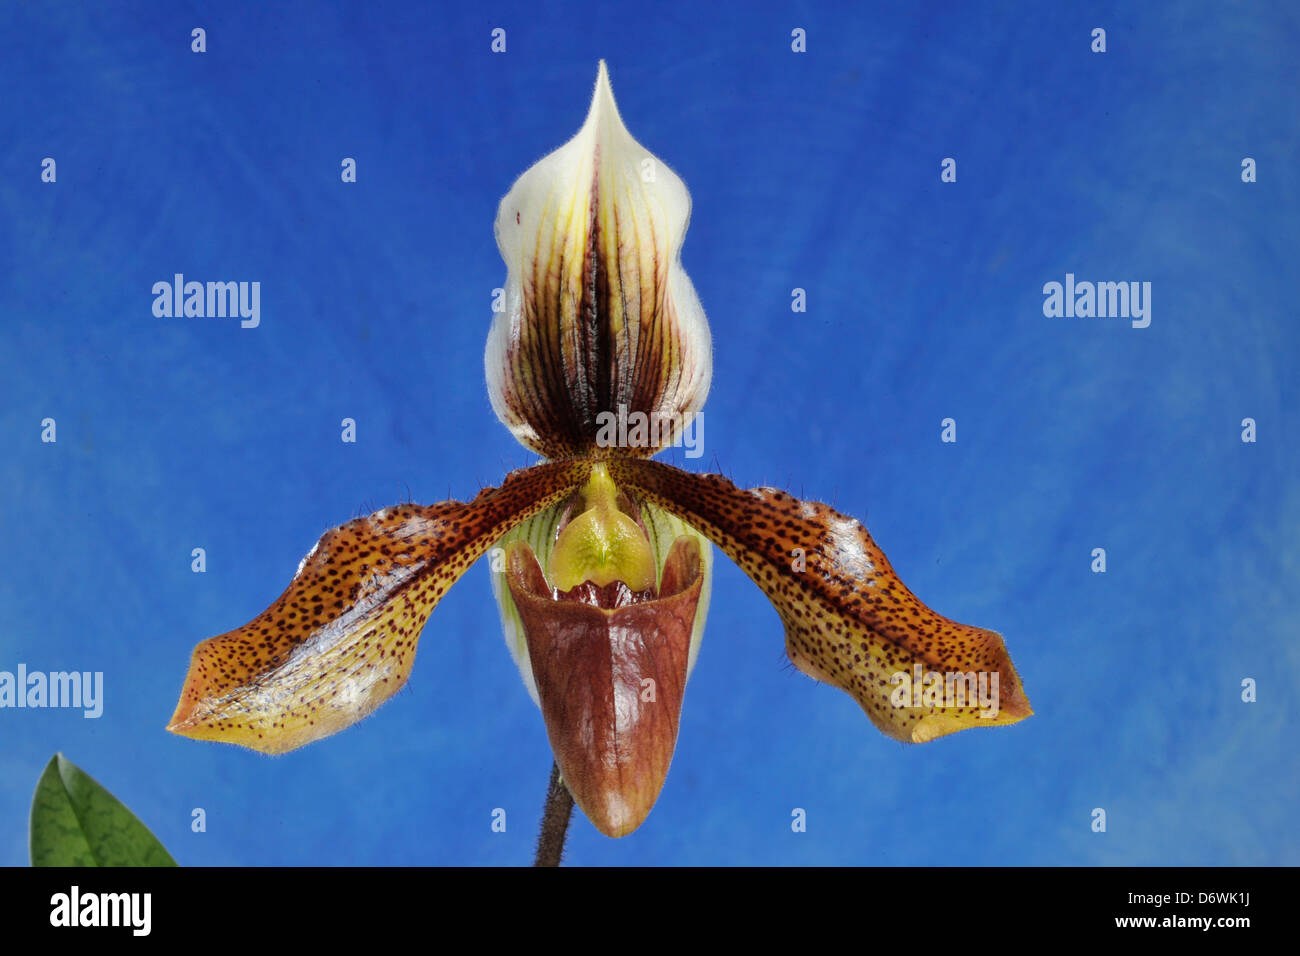 Close-up of Lady's Slipper orchid flower Stock Photo